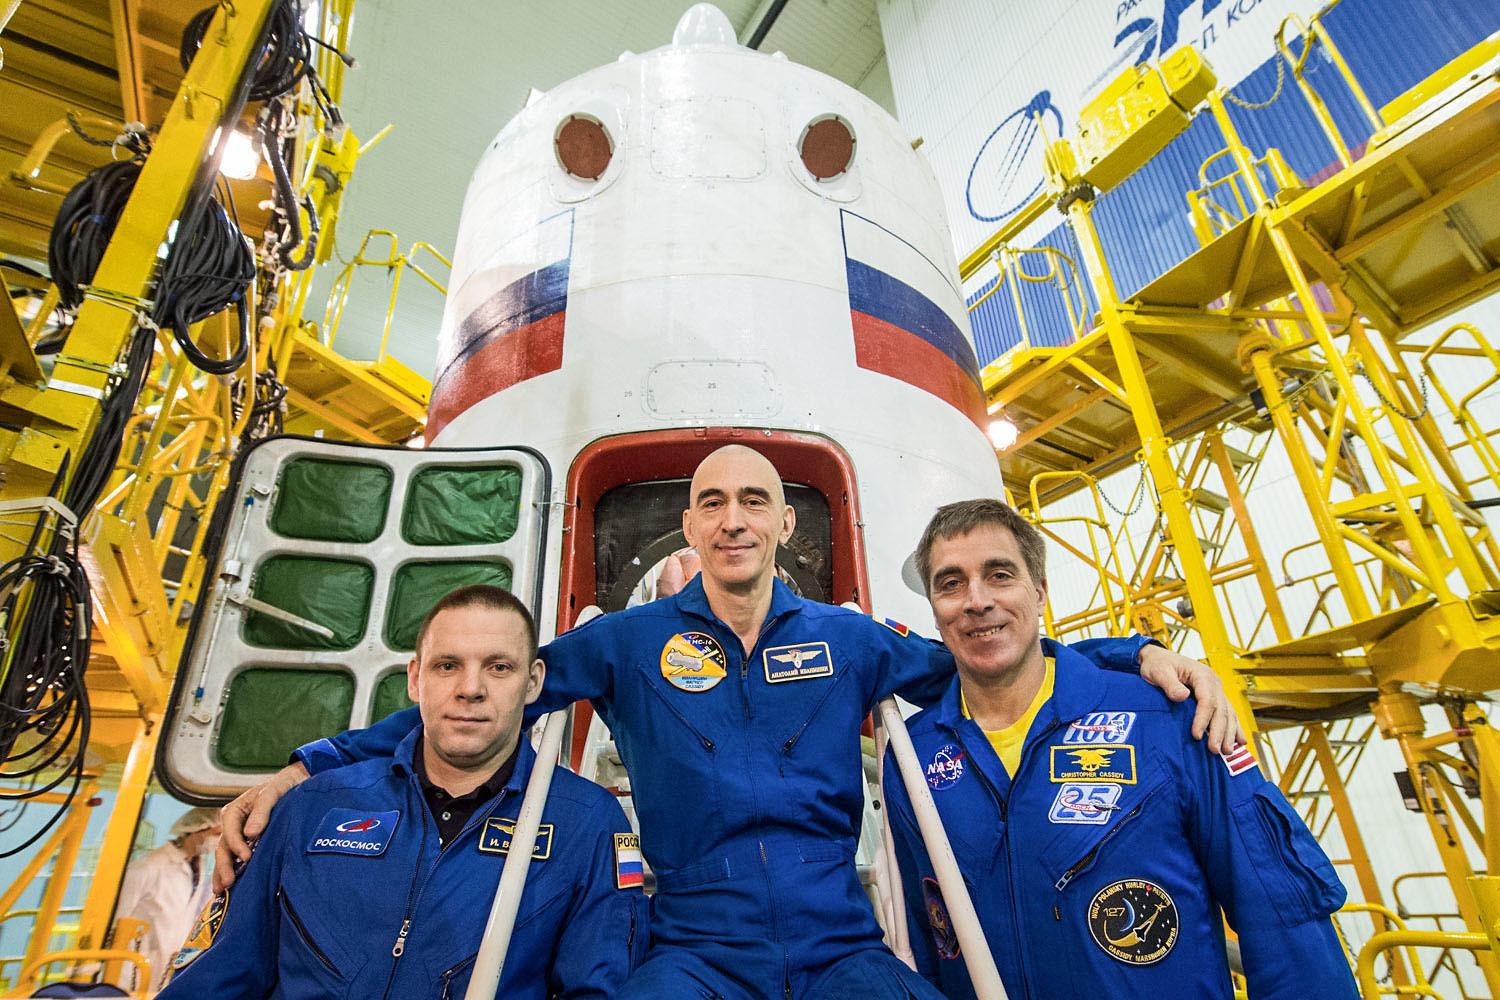 At the Baikonur Cosmodrome in Kazakhstan, Expedition 63 crew members Ivan Vagner (left) and Anatoly Ivanishin (center) of Roscosmos and NASA astronaut Chris Cassidy (right) pose for pictures April 3 in front of their Soyuz spacecraft as part of their prelaunch activities